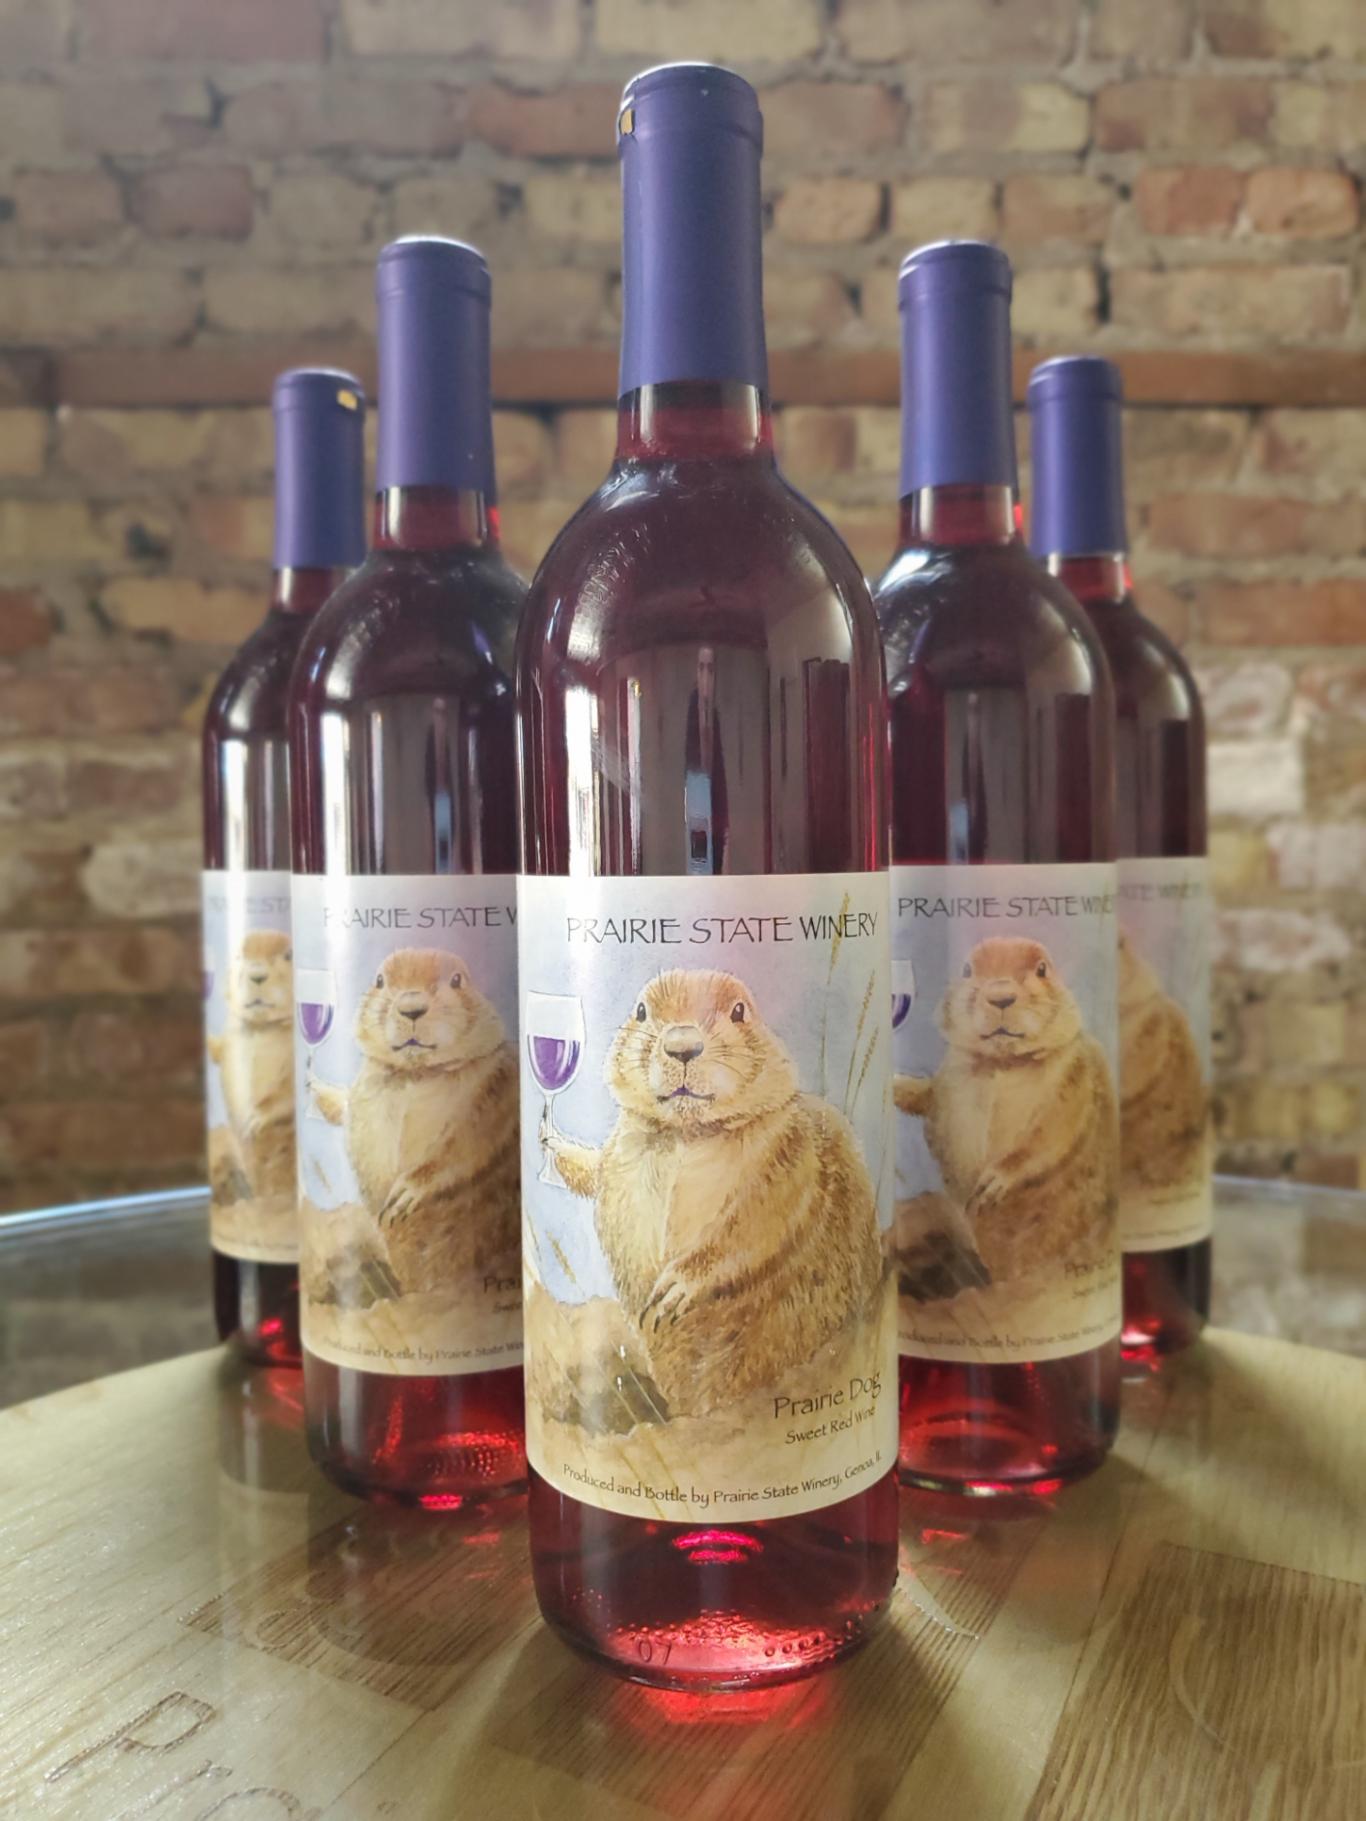 Product Image for Prairie Dog